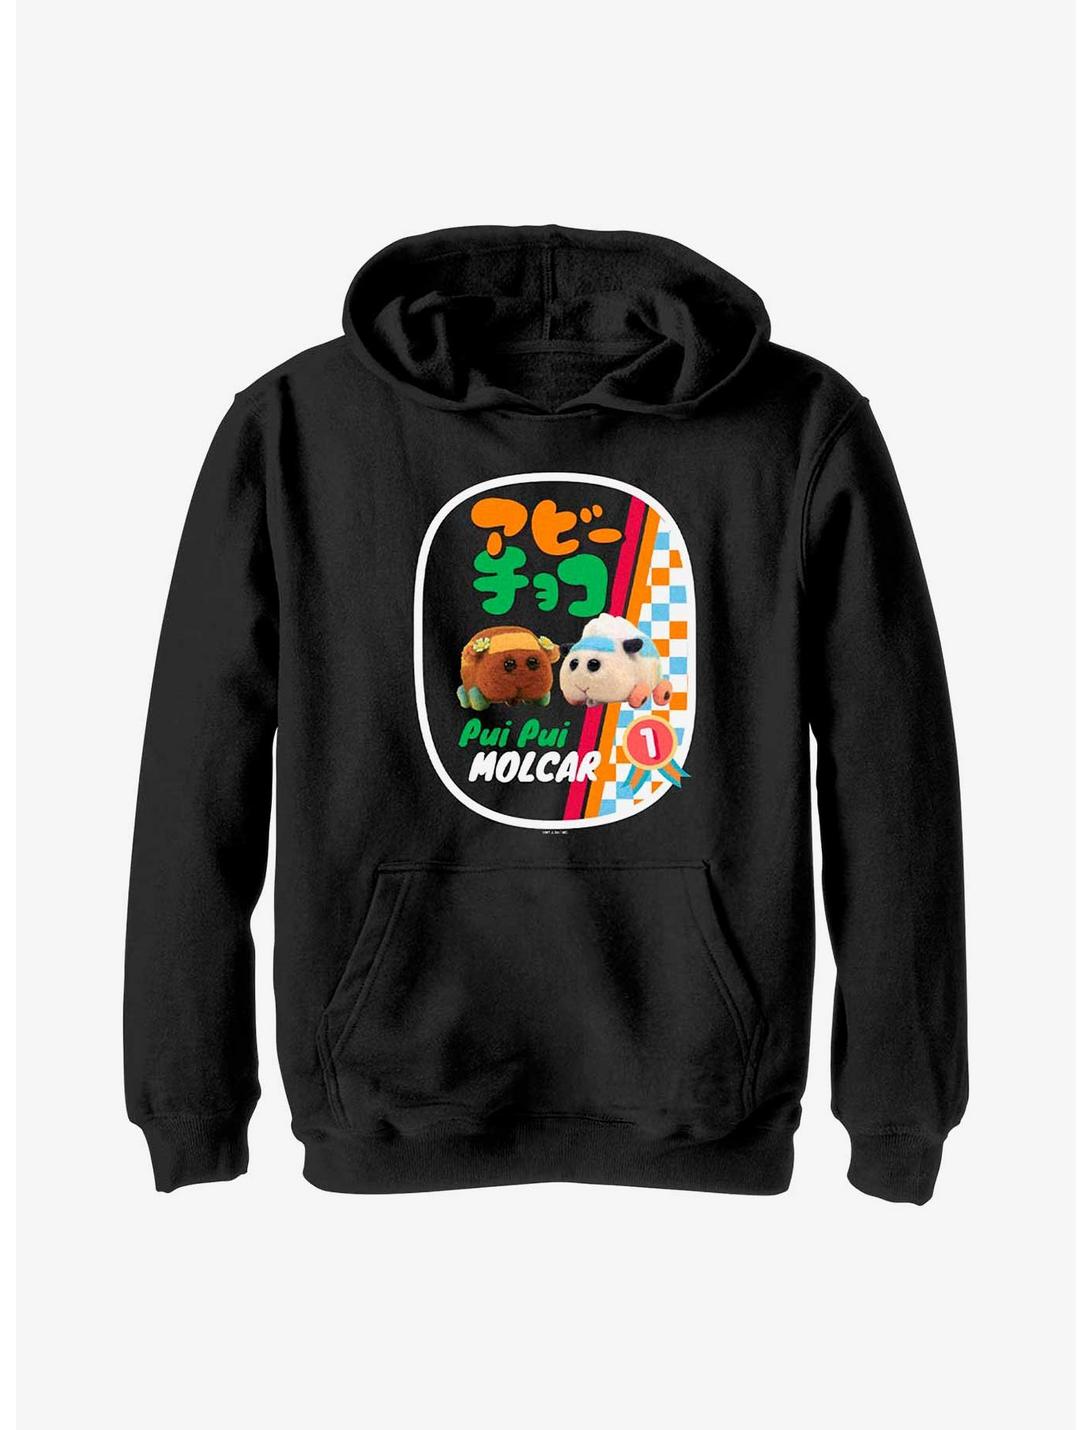 Pui Pui Molcar Choco And Abbey Youth Hoodie, BLACK, hi-res